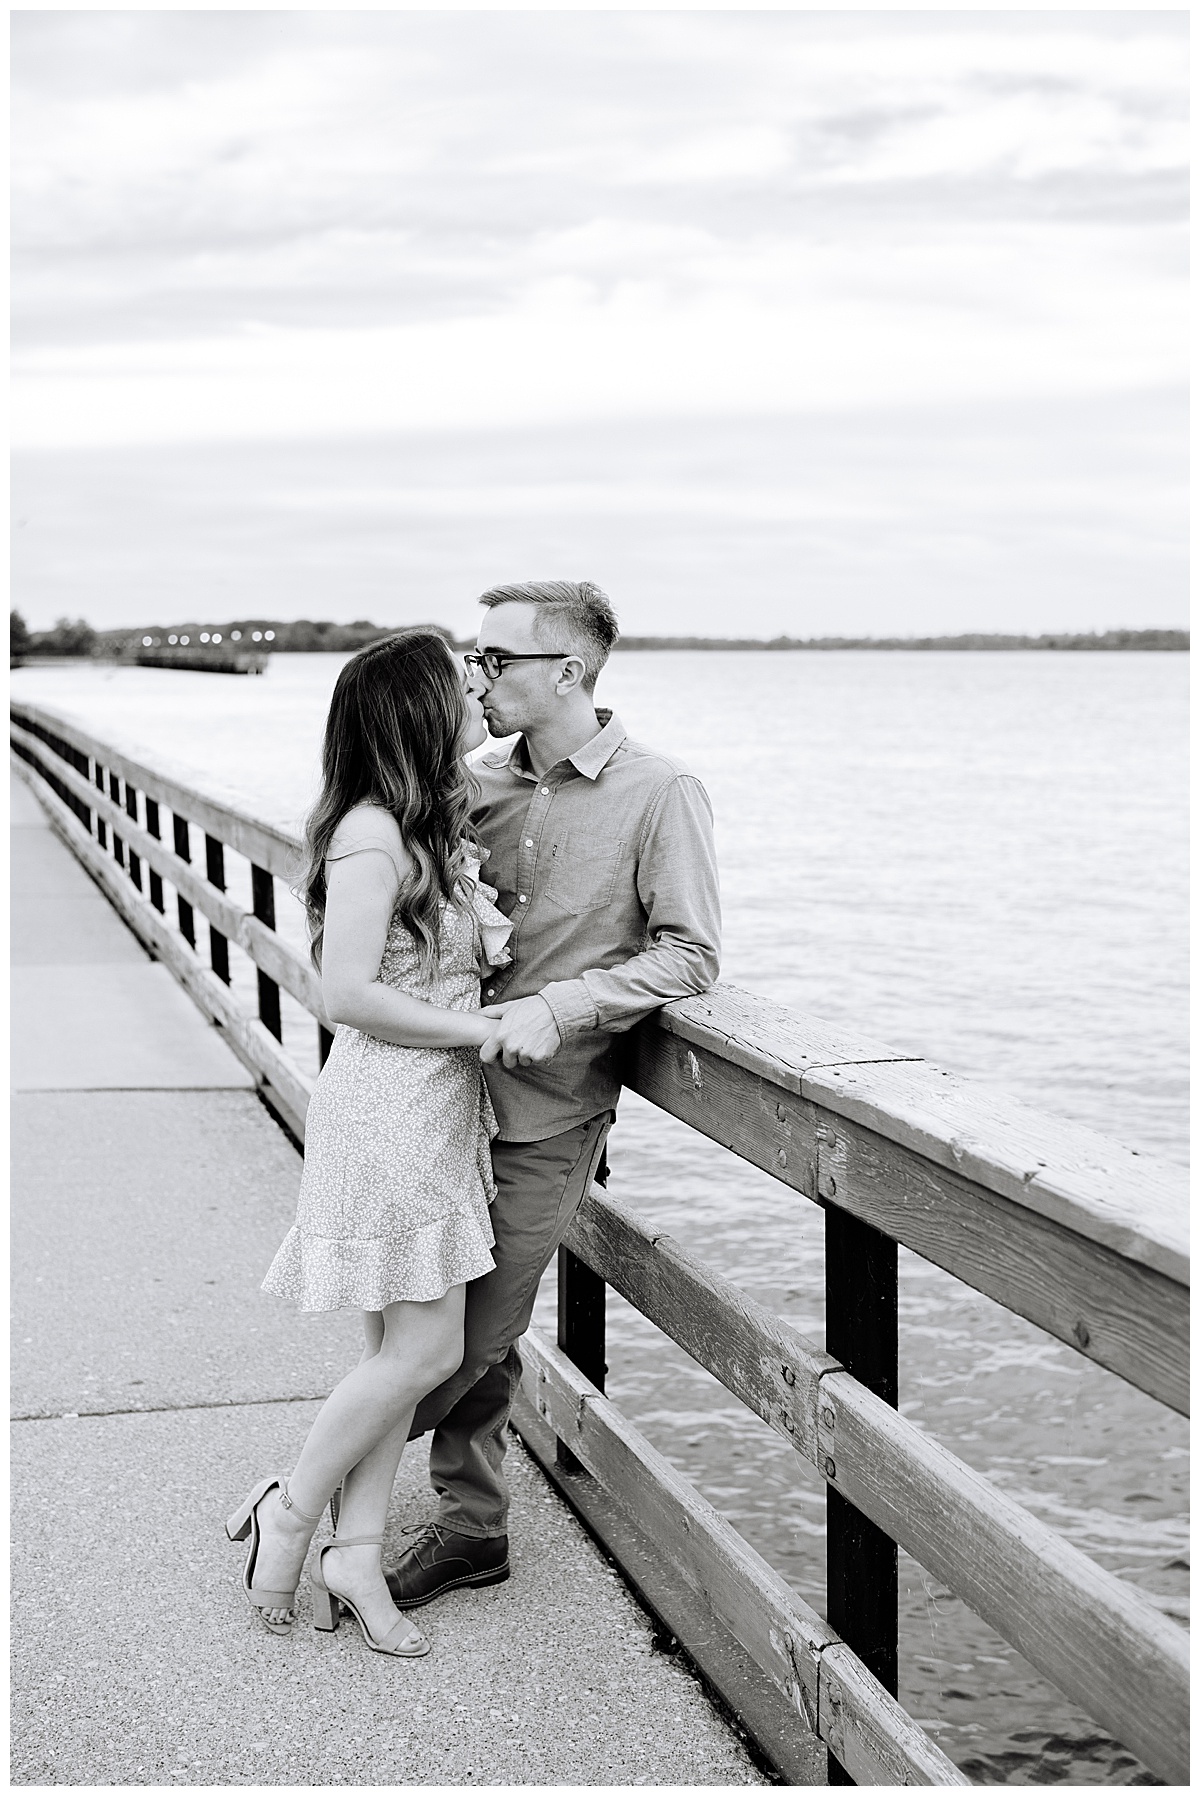 Man and woman kiss on waterfront for Michigan Wedding Photographer